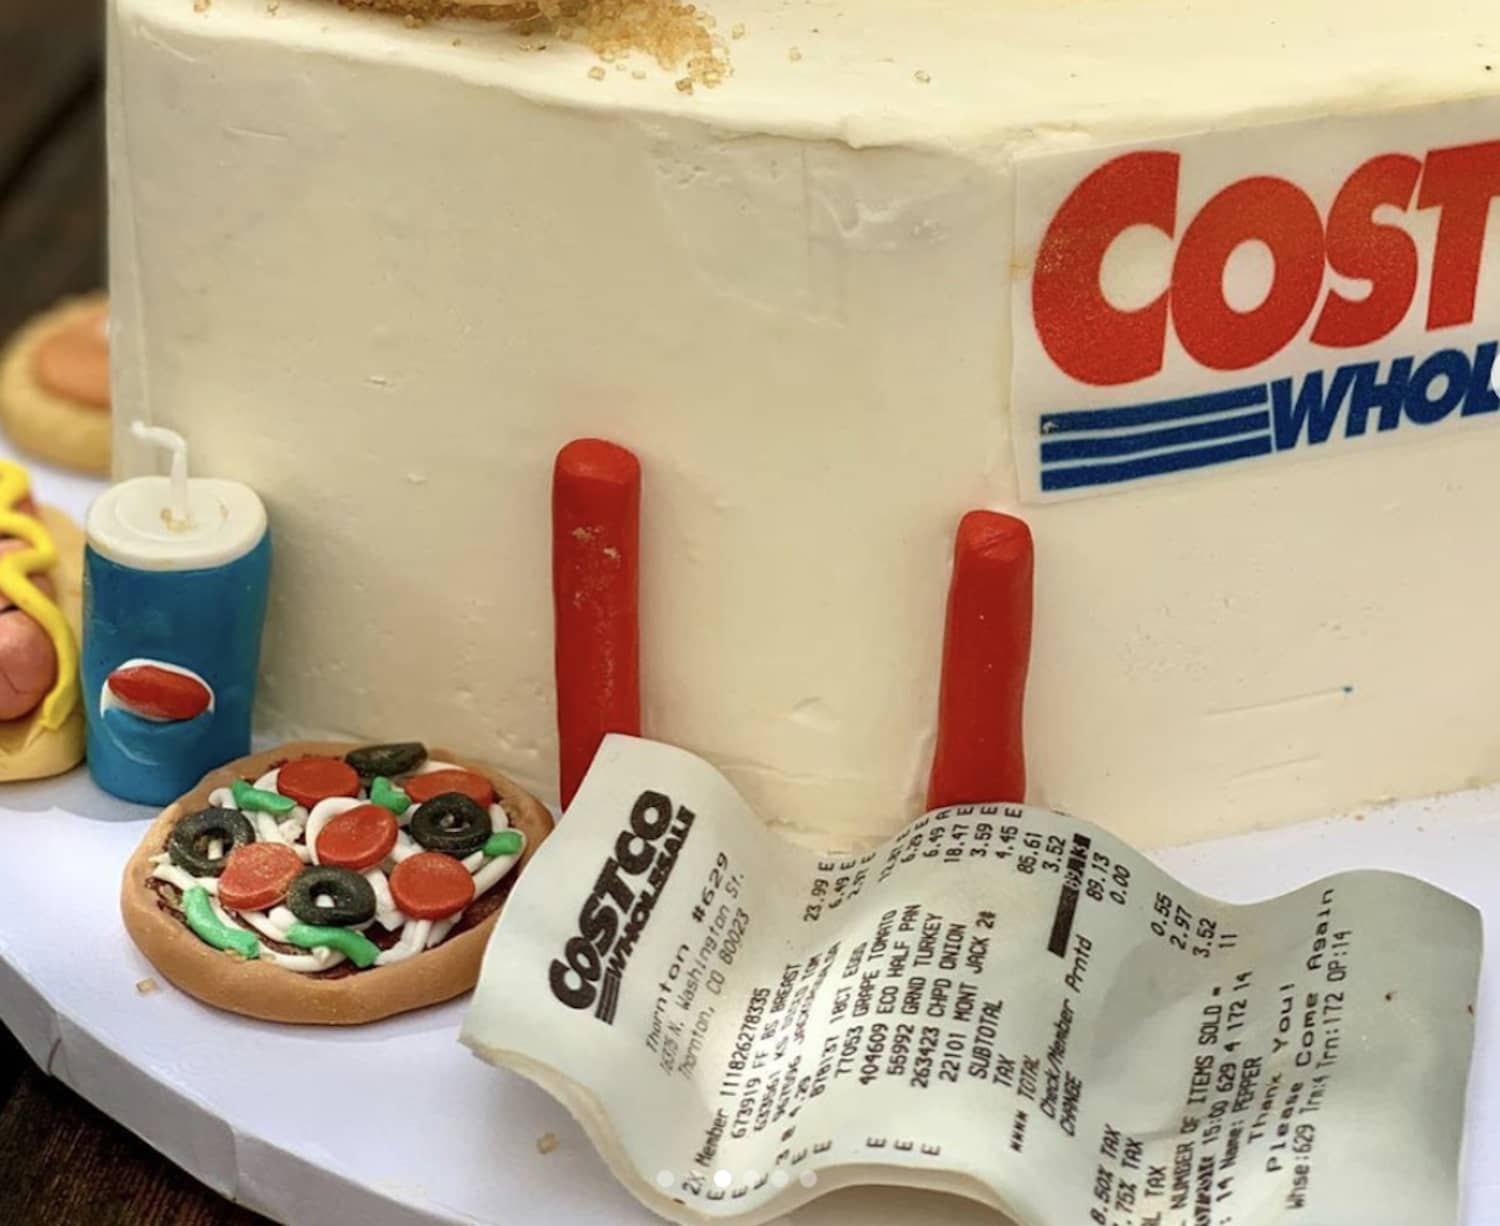 This Costco Birthday Cake Is a Total Masterpiece | Kitchn